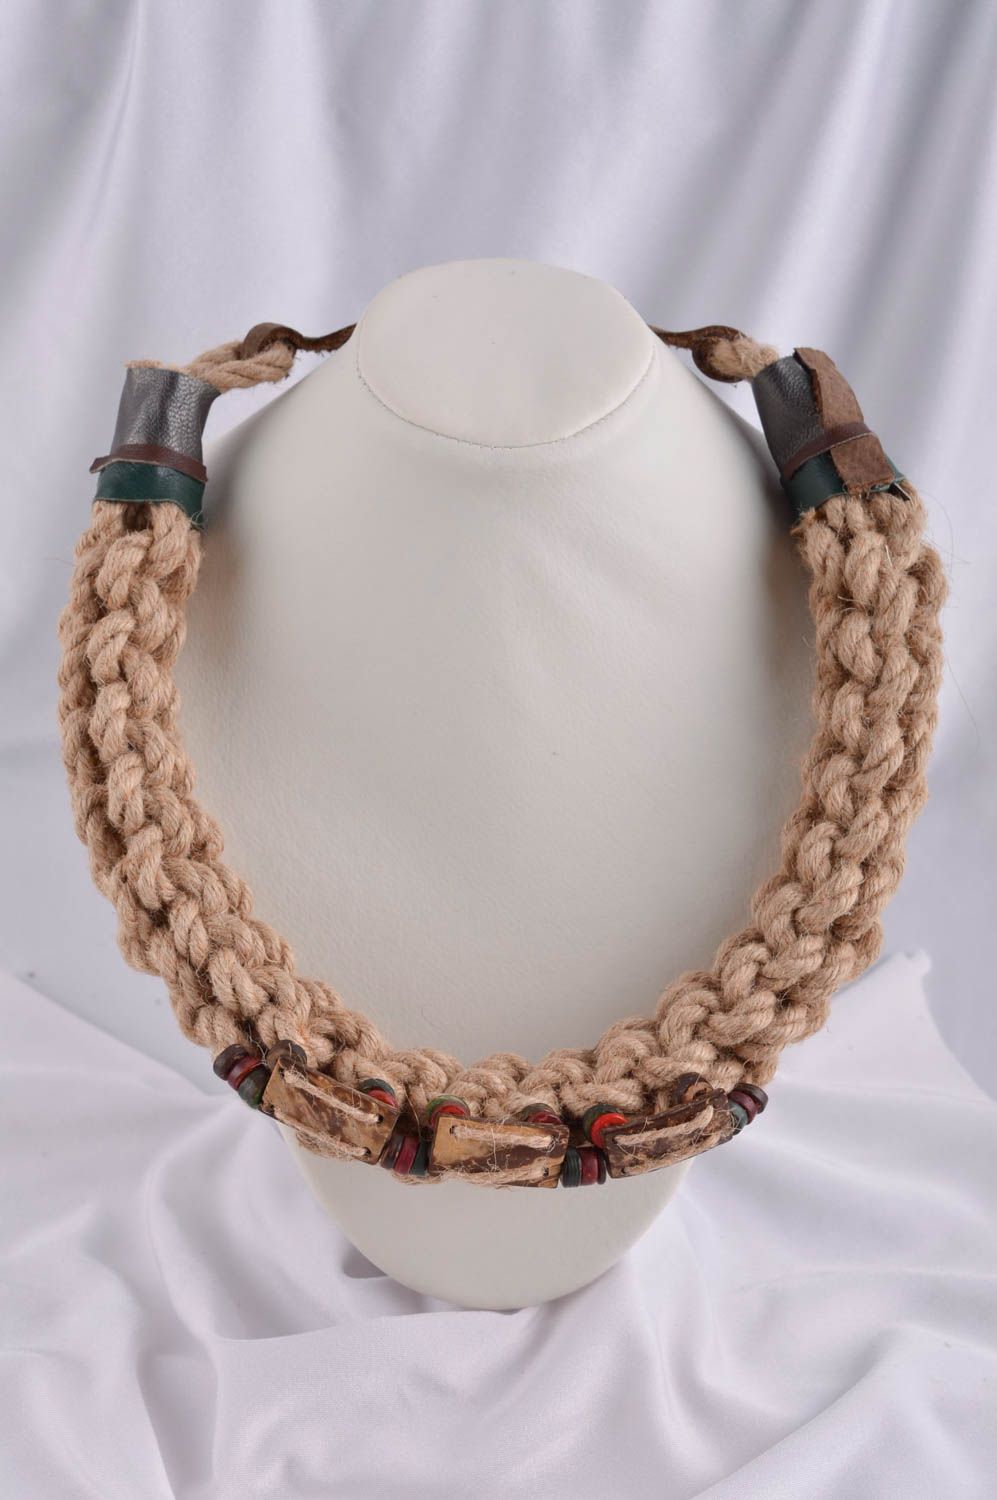 Woven necklace in ethnic style leather accessories fashion necklace for women photo 1